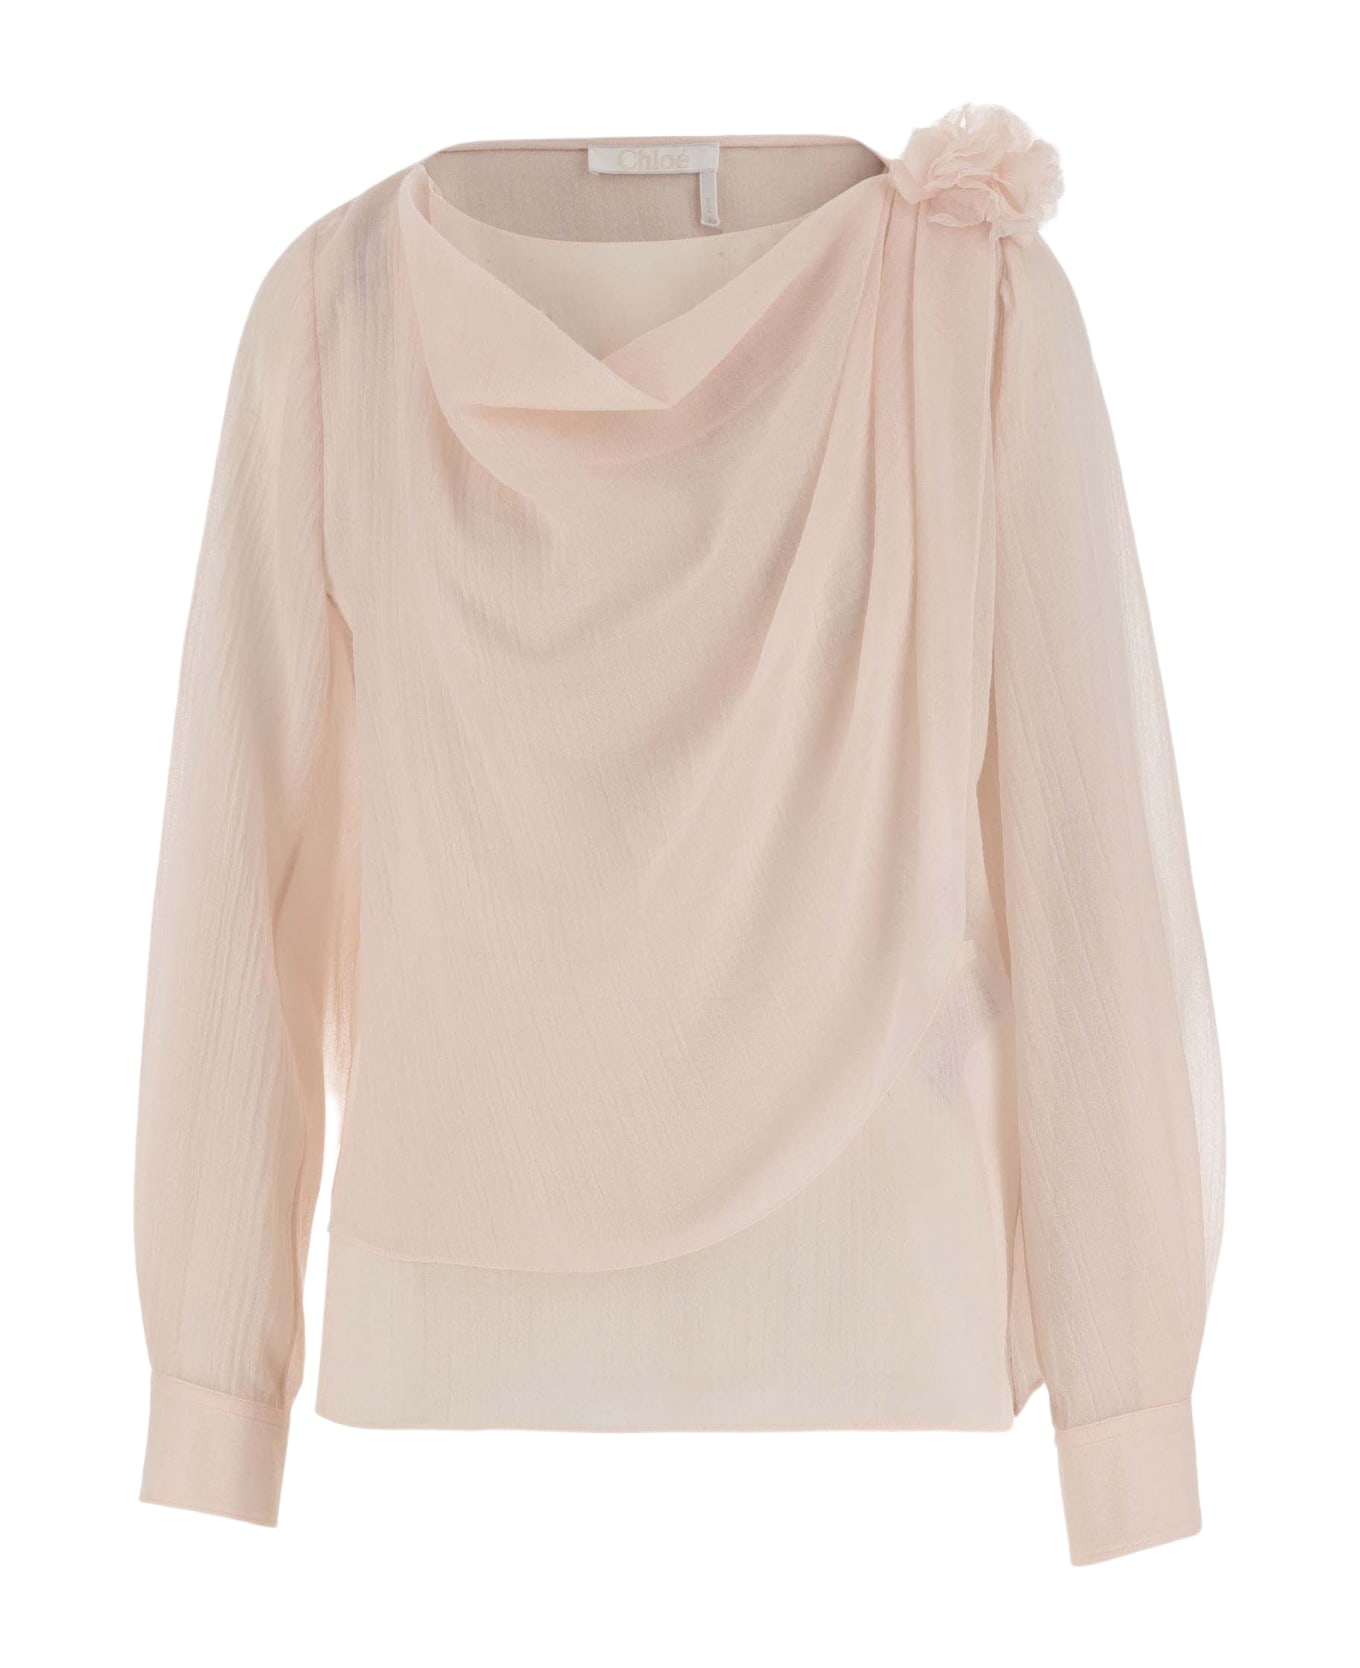 Chloé Draped Top With Boat Neckline - Pink タンクトップ